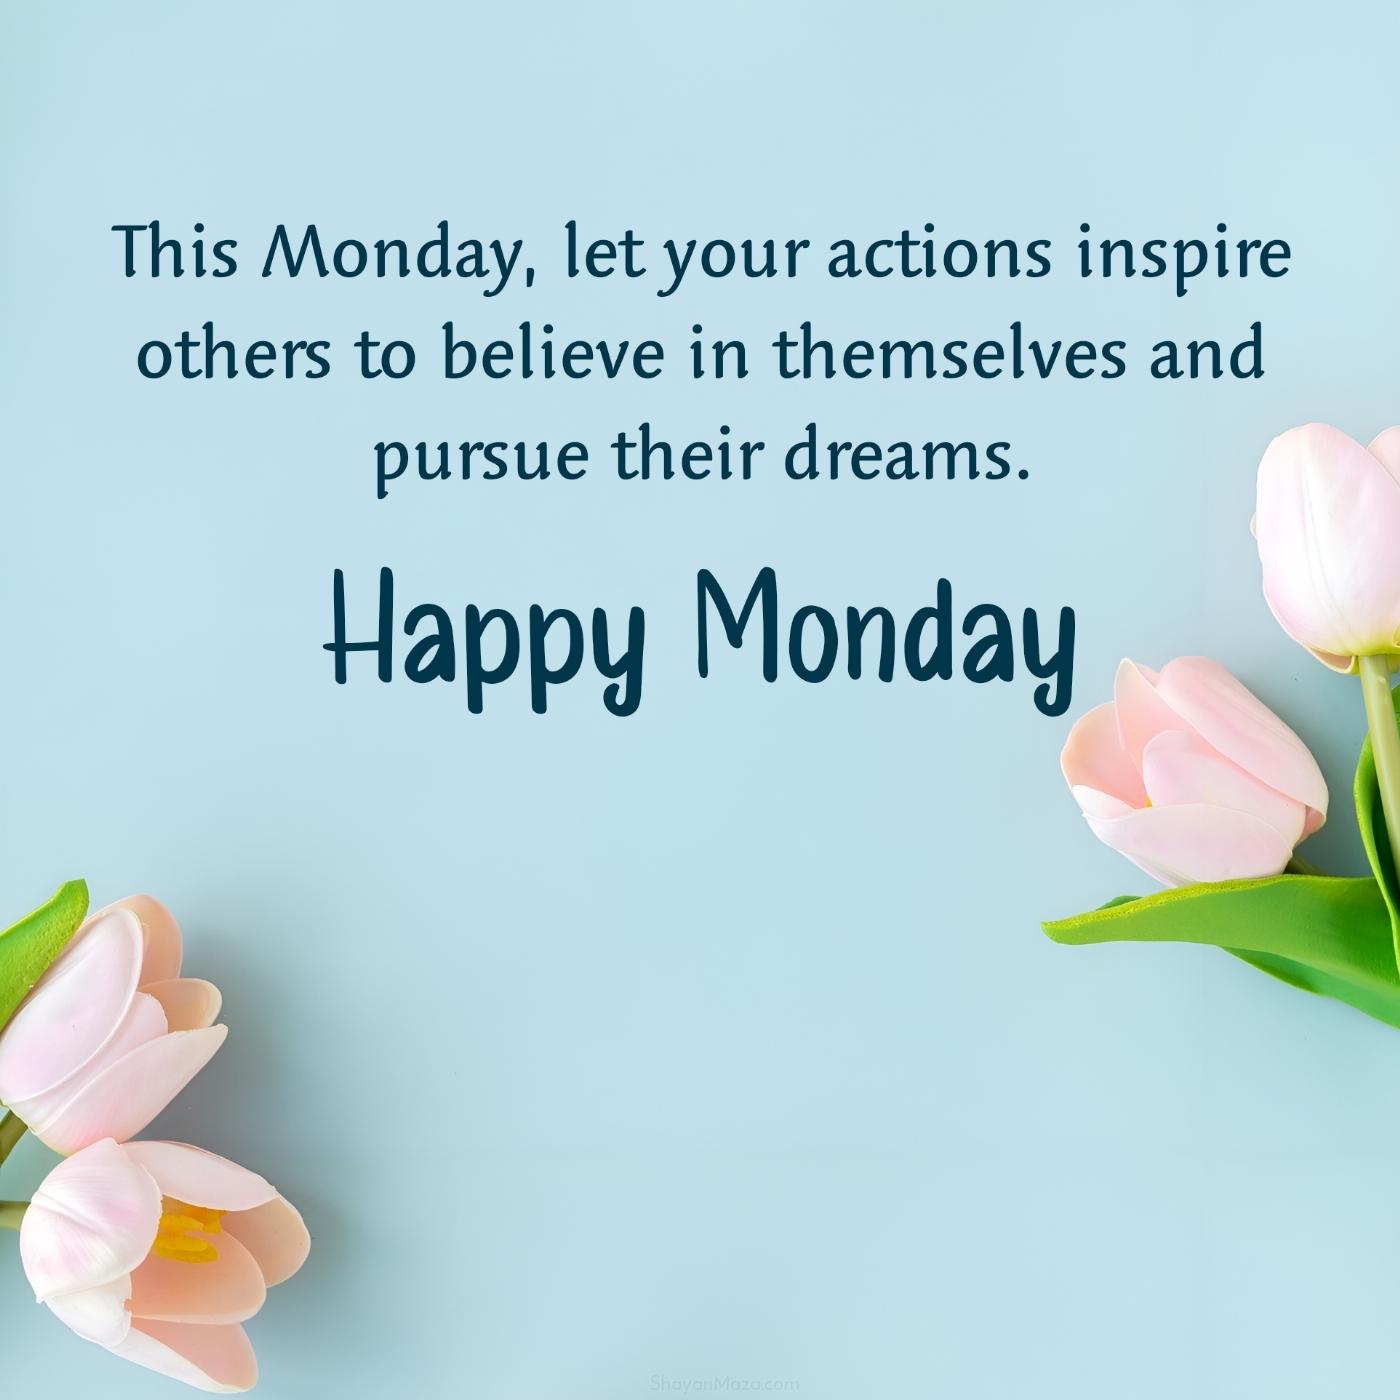 This Monday let your actions inspire others to believe in themselves